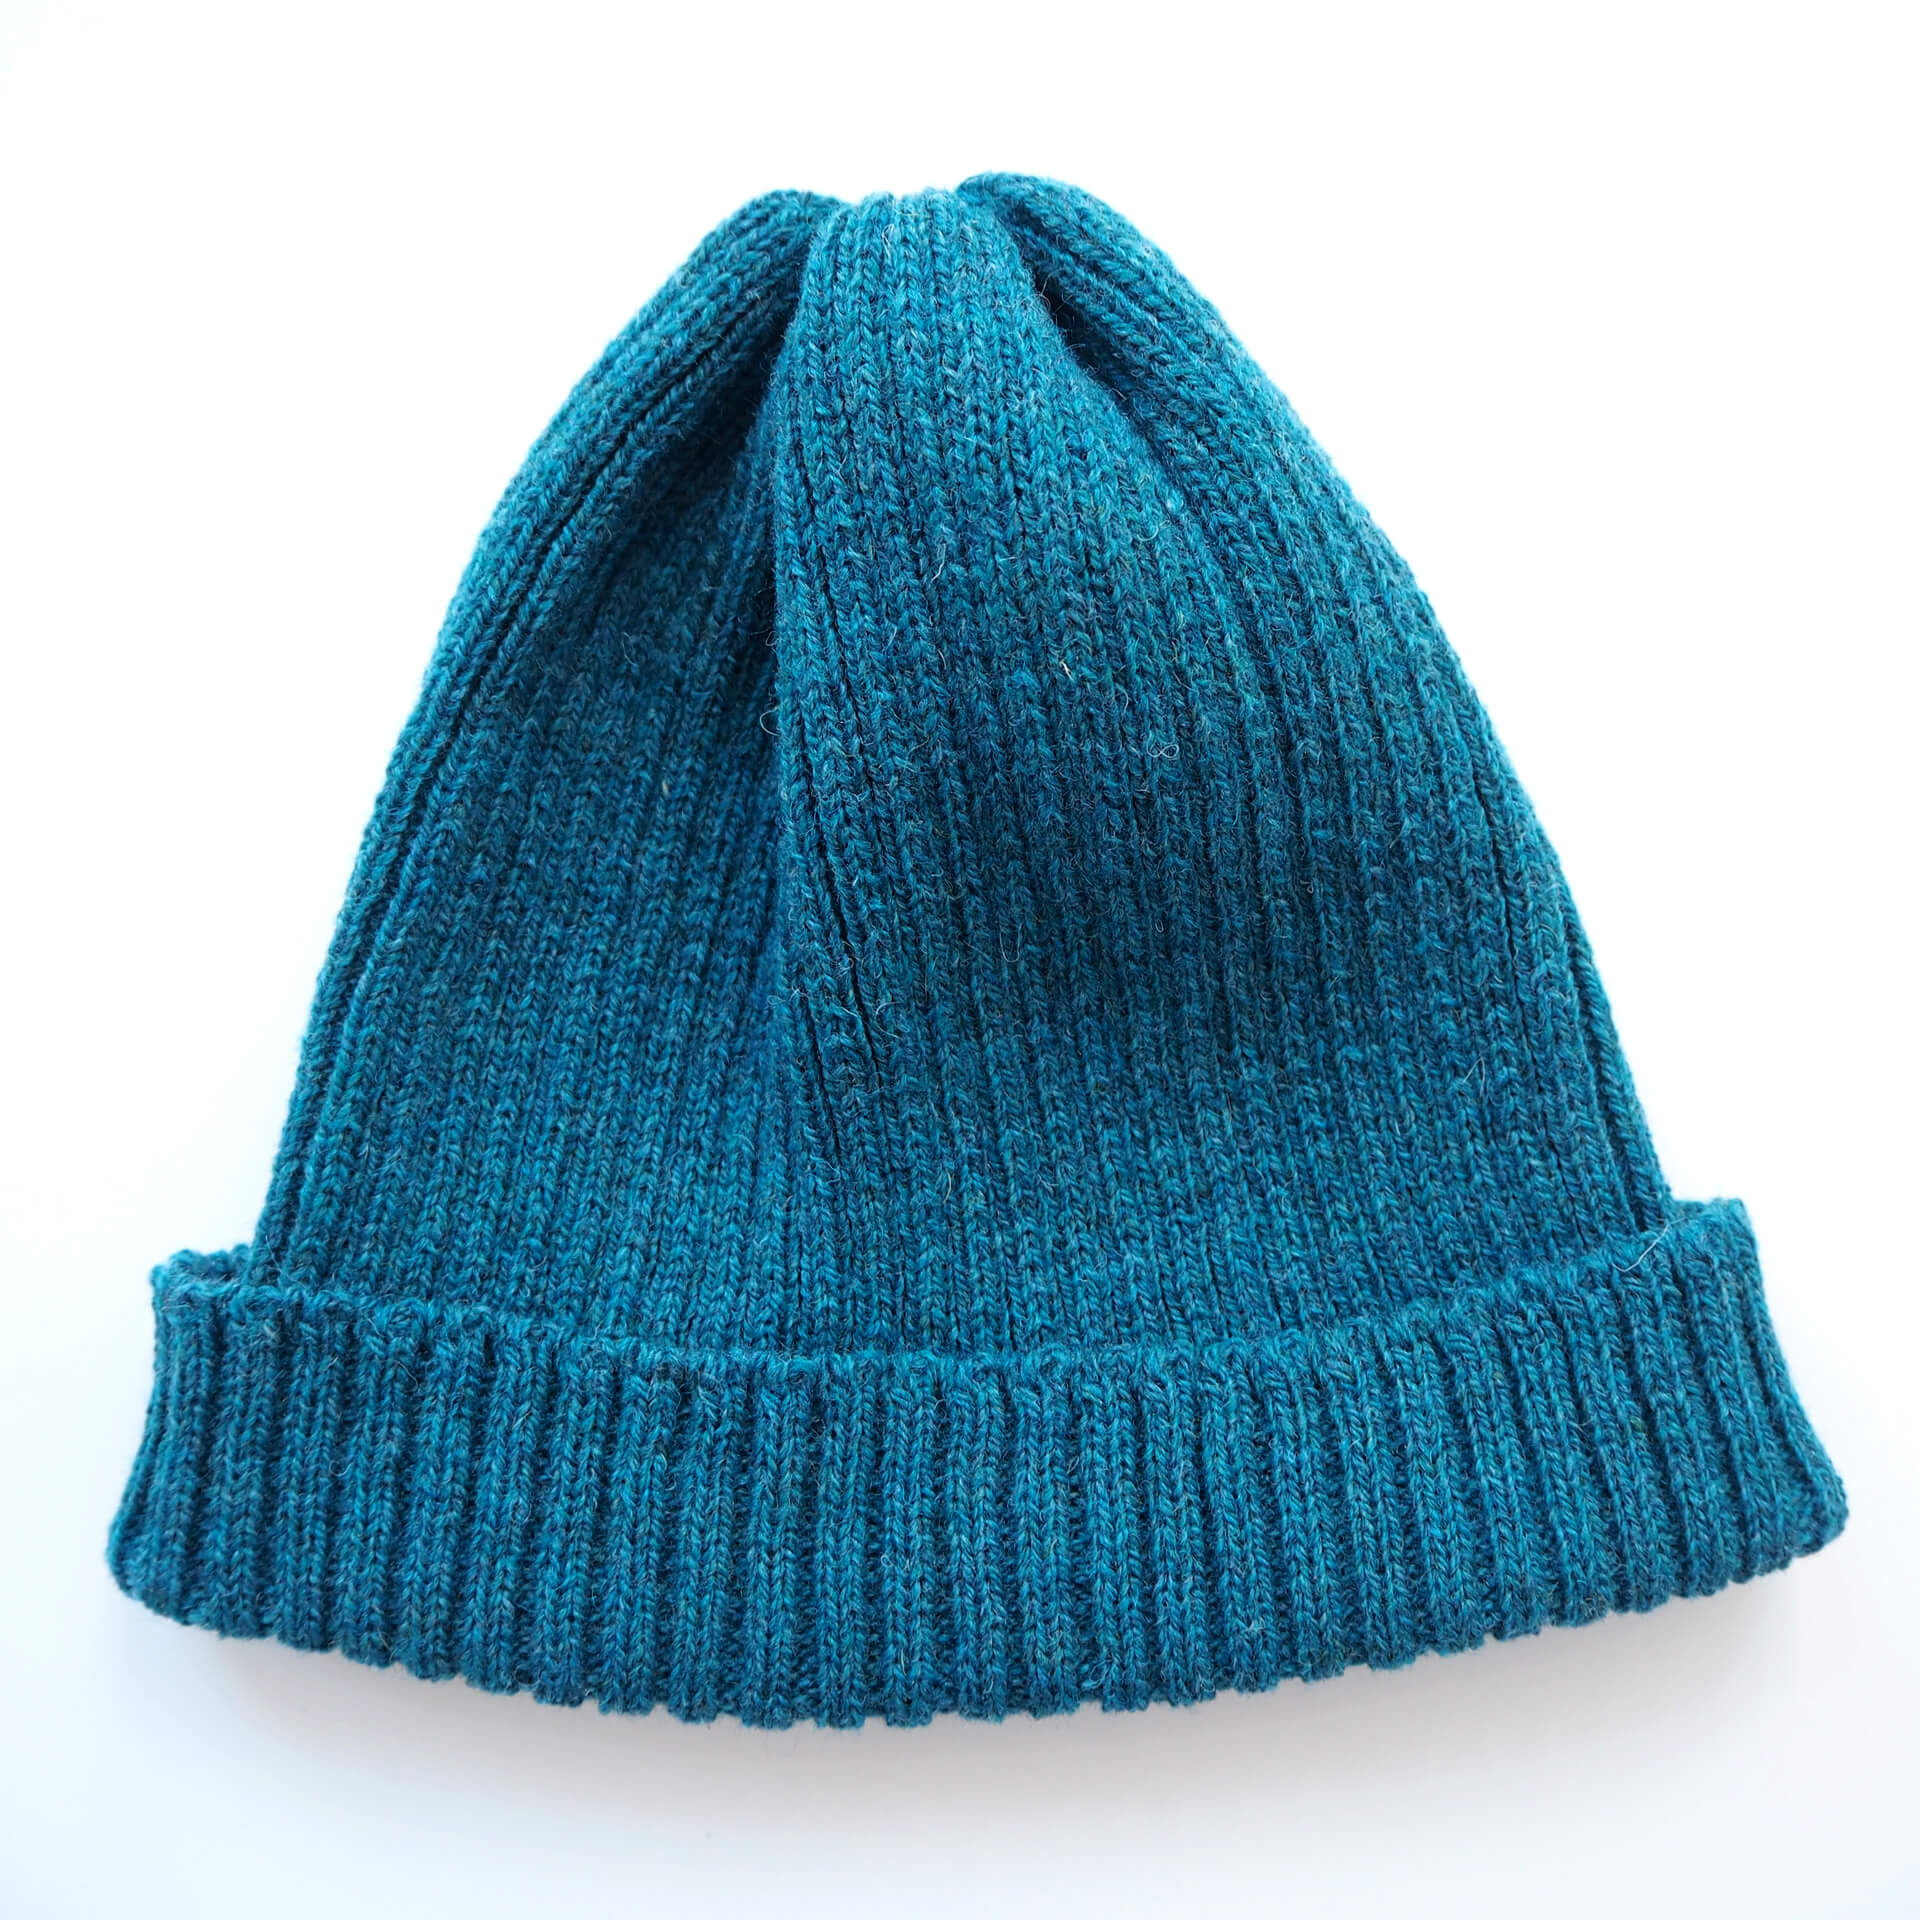 A blue ribbed beanie with a folded brim by K.Moods, on a white background.